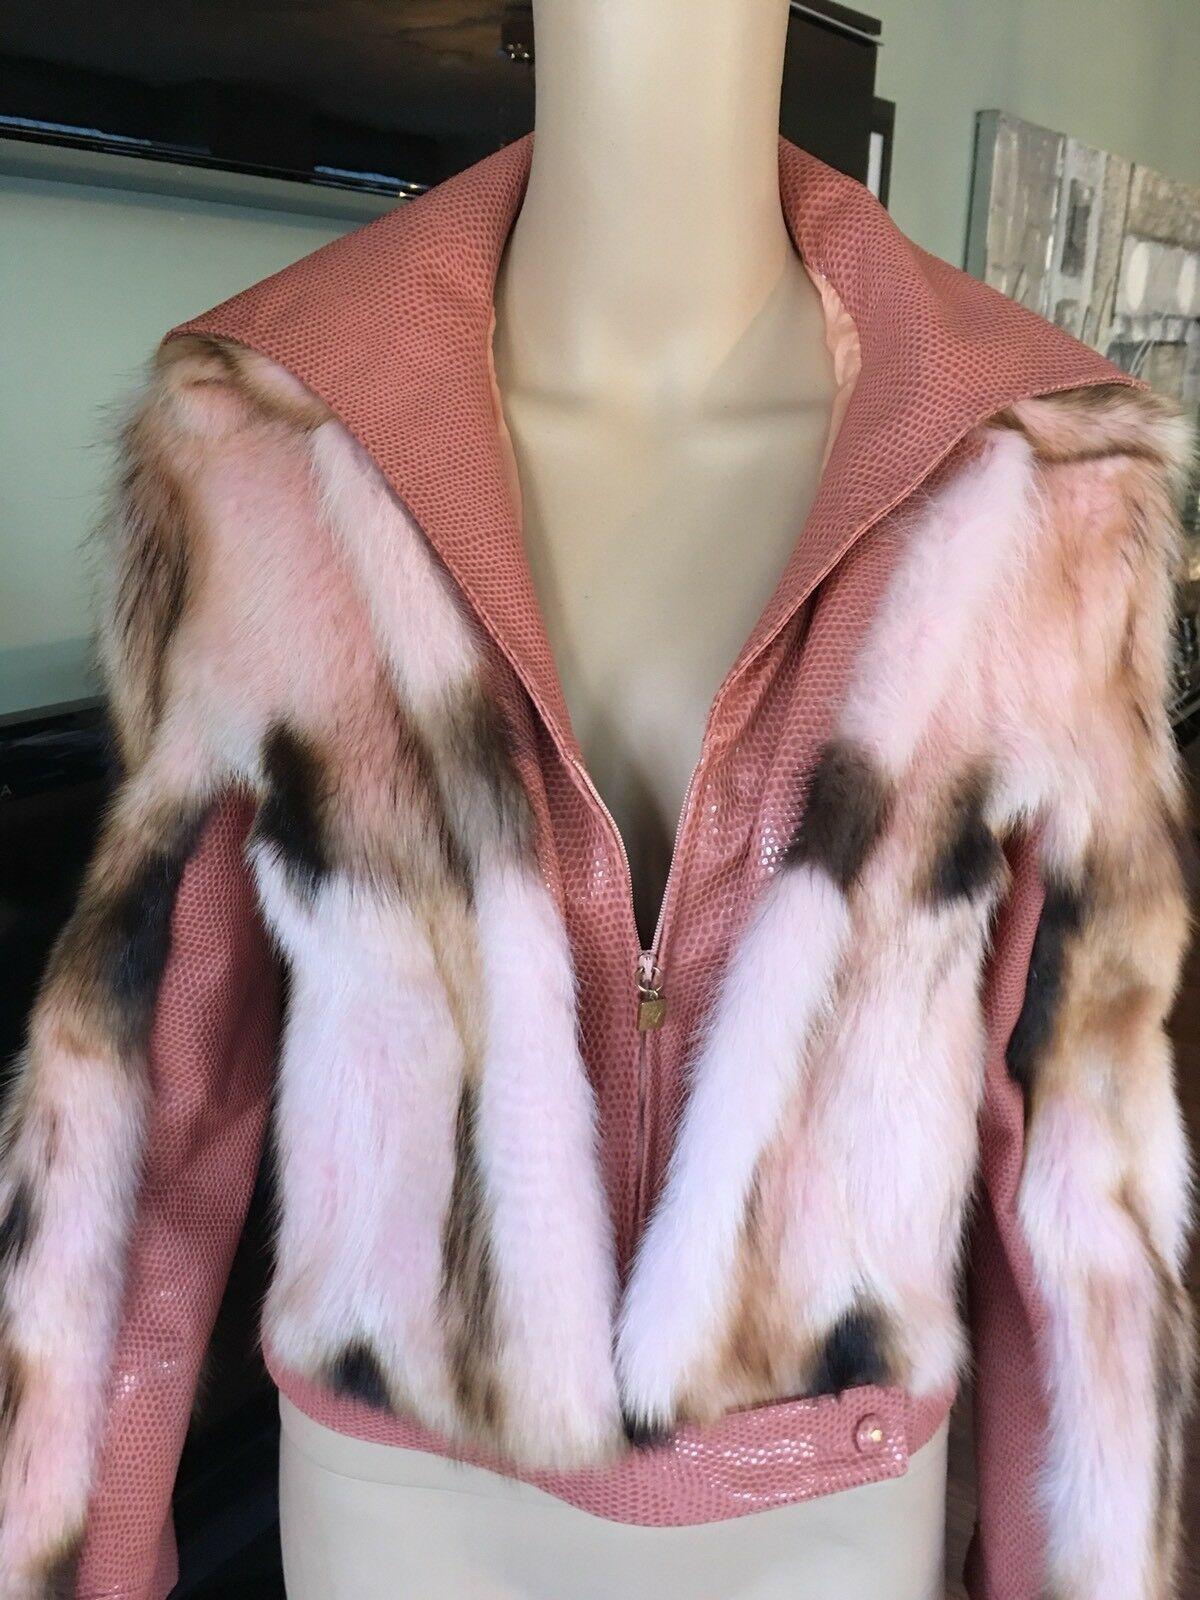 GIANNI VERSACE F/W 2000 Runway Vintage Leather and Fur Jacket Coat IT 40

Gianni Versace Ad Campaign!

Monochrome pink and brown Gianni Versace embossed leather jacket with fur panels throughout, pointed collar, dual slit pockets at waist and hidden